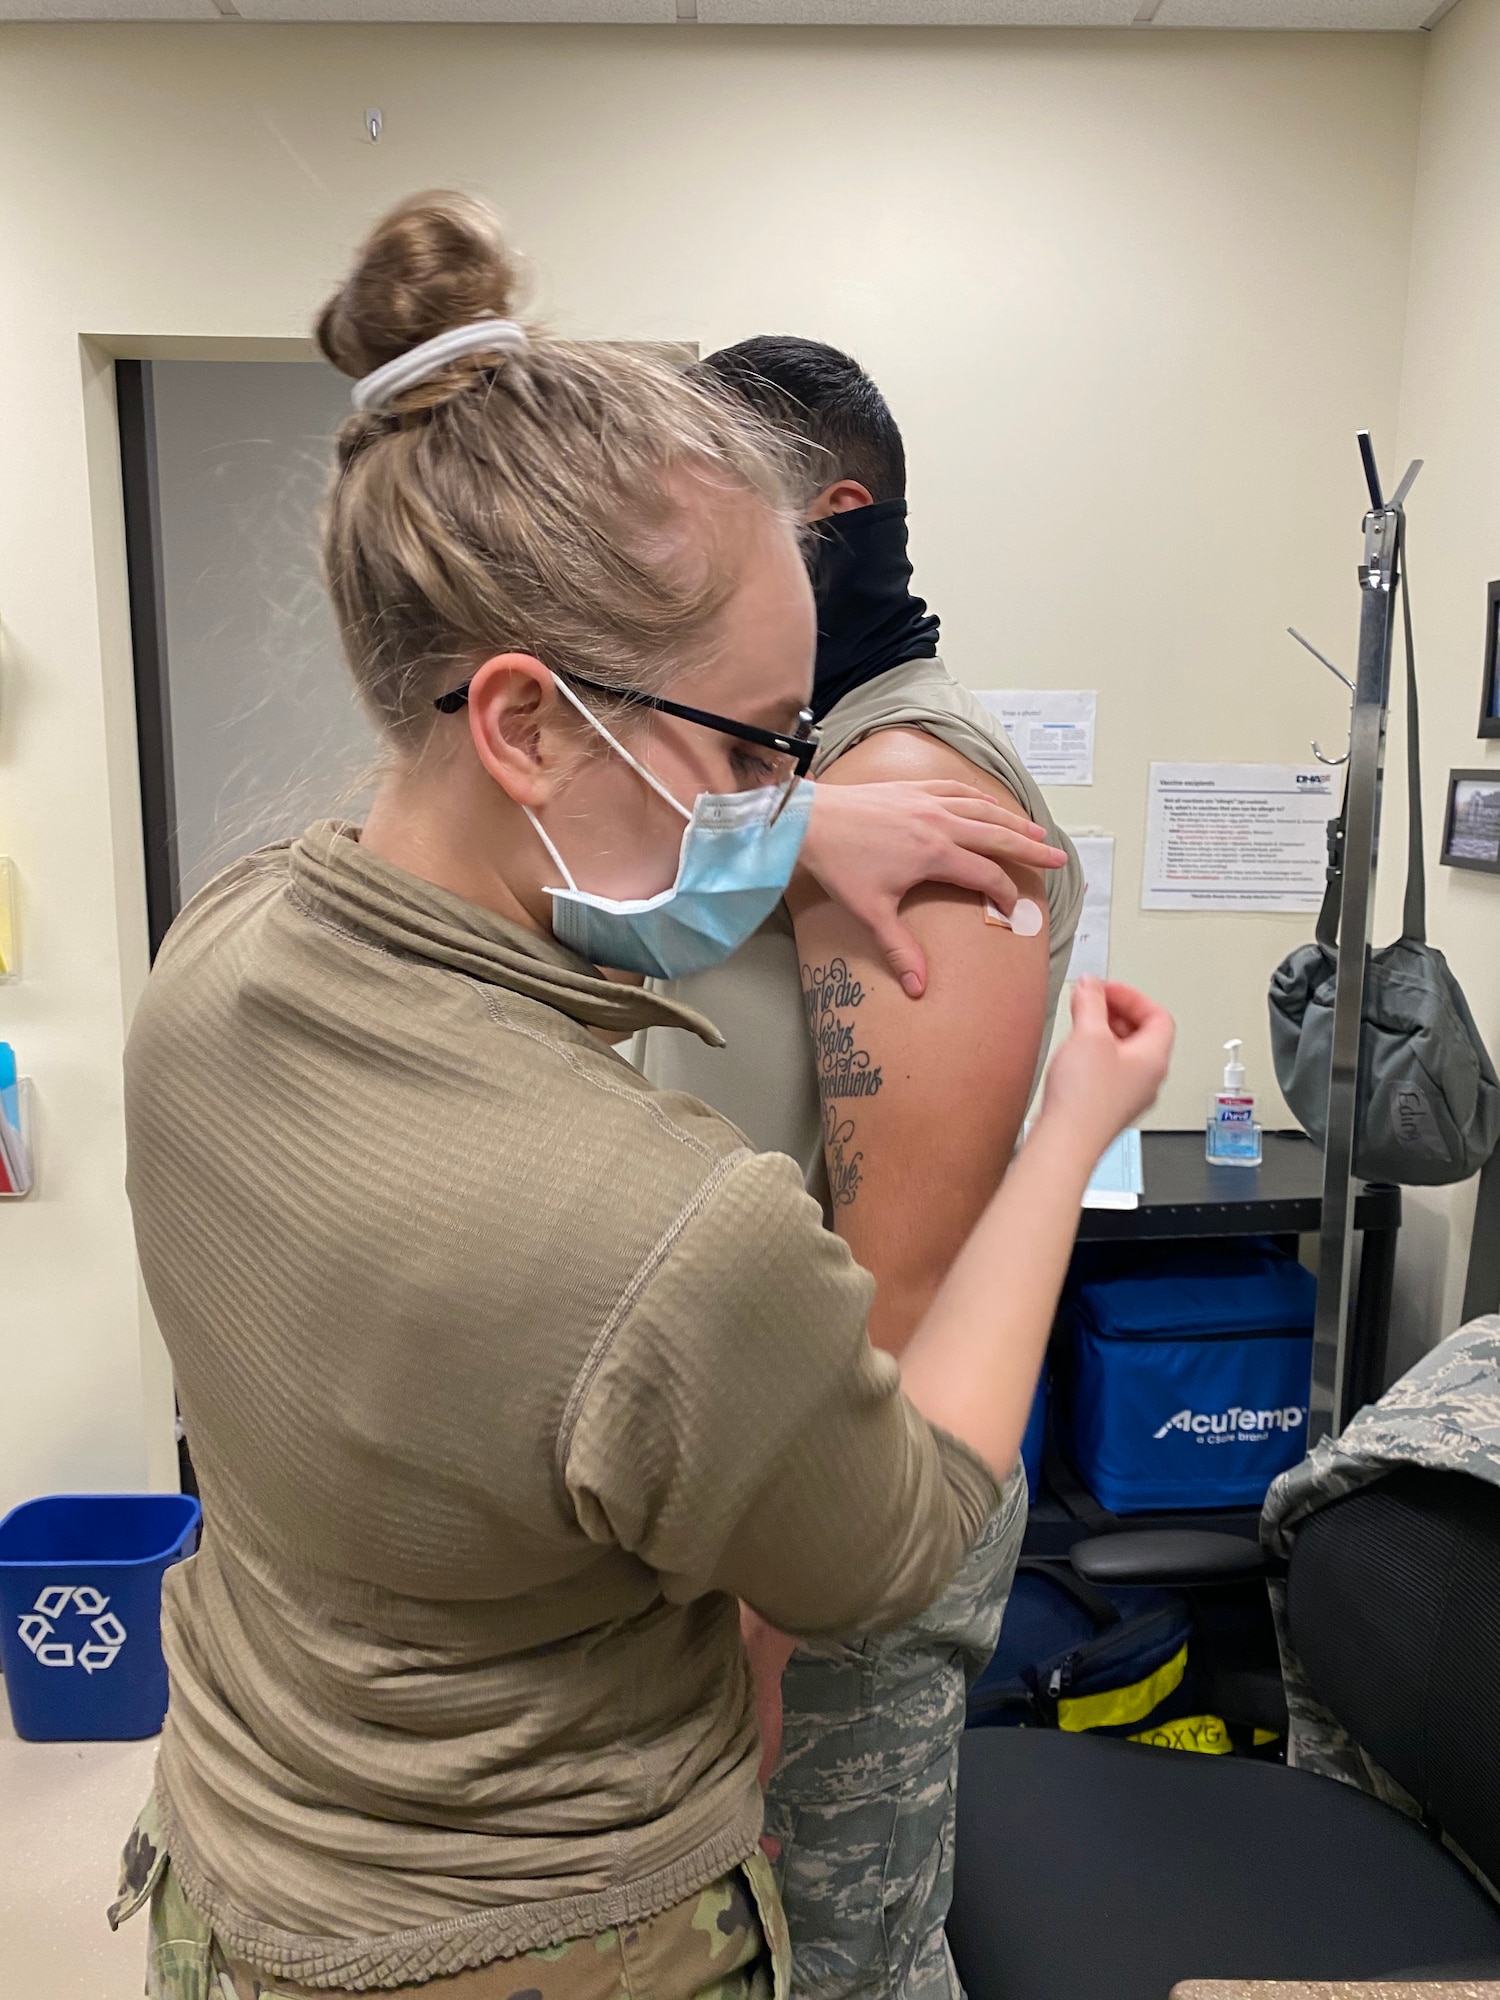 A member of the 128th Air Refueling Wing receives the COVID-19 Vaccine here at 128th Air Refueling Wing, Milwaukee, Feb. 7, 2020. The 128th Air Refueling Wing has begun the distribution of the COVID-19 vaccine in coordination with the U.S. Department of Defense's Operation Warp Speed. (U.S. Air National Guard photo by Master Sgt. Kellen Kroening)